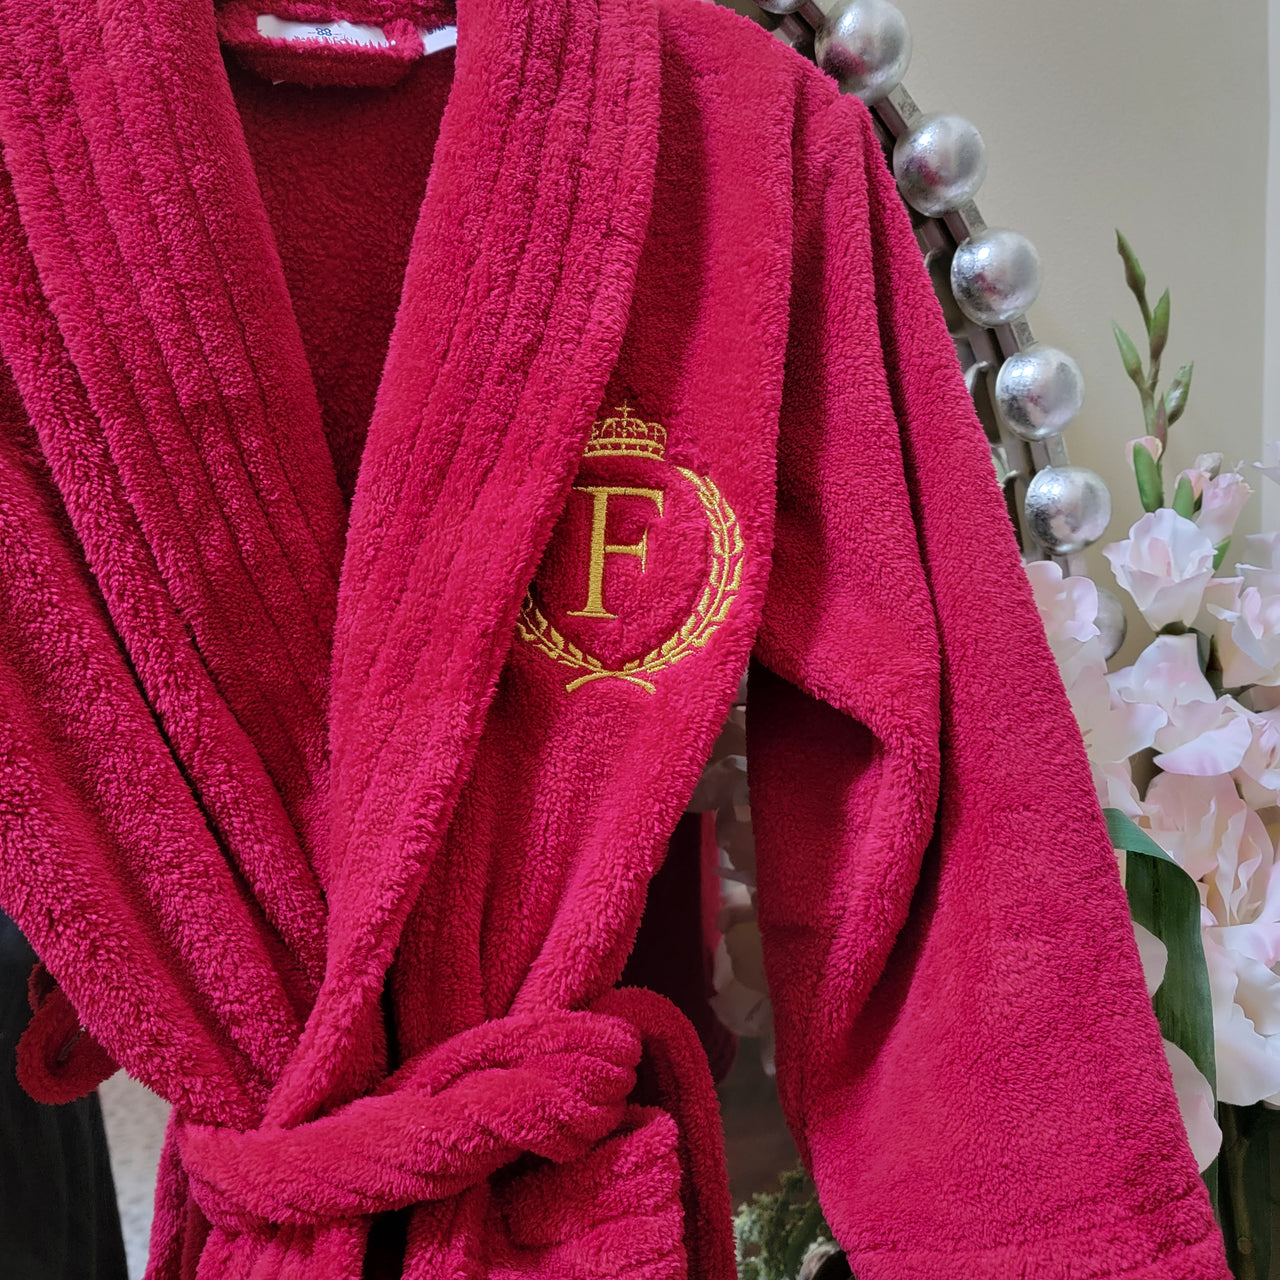 Royalty Monogrammed Robe - 5 Colors